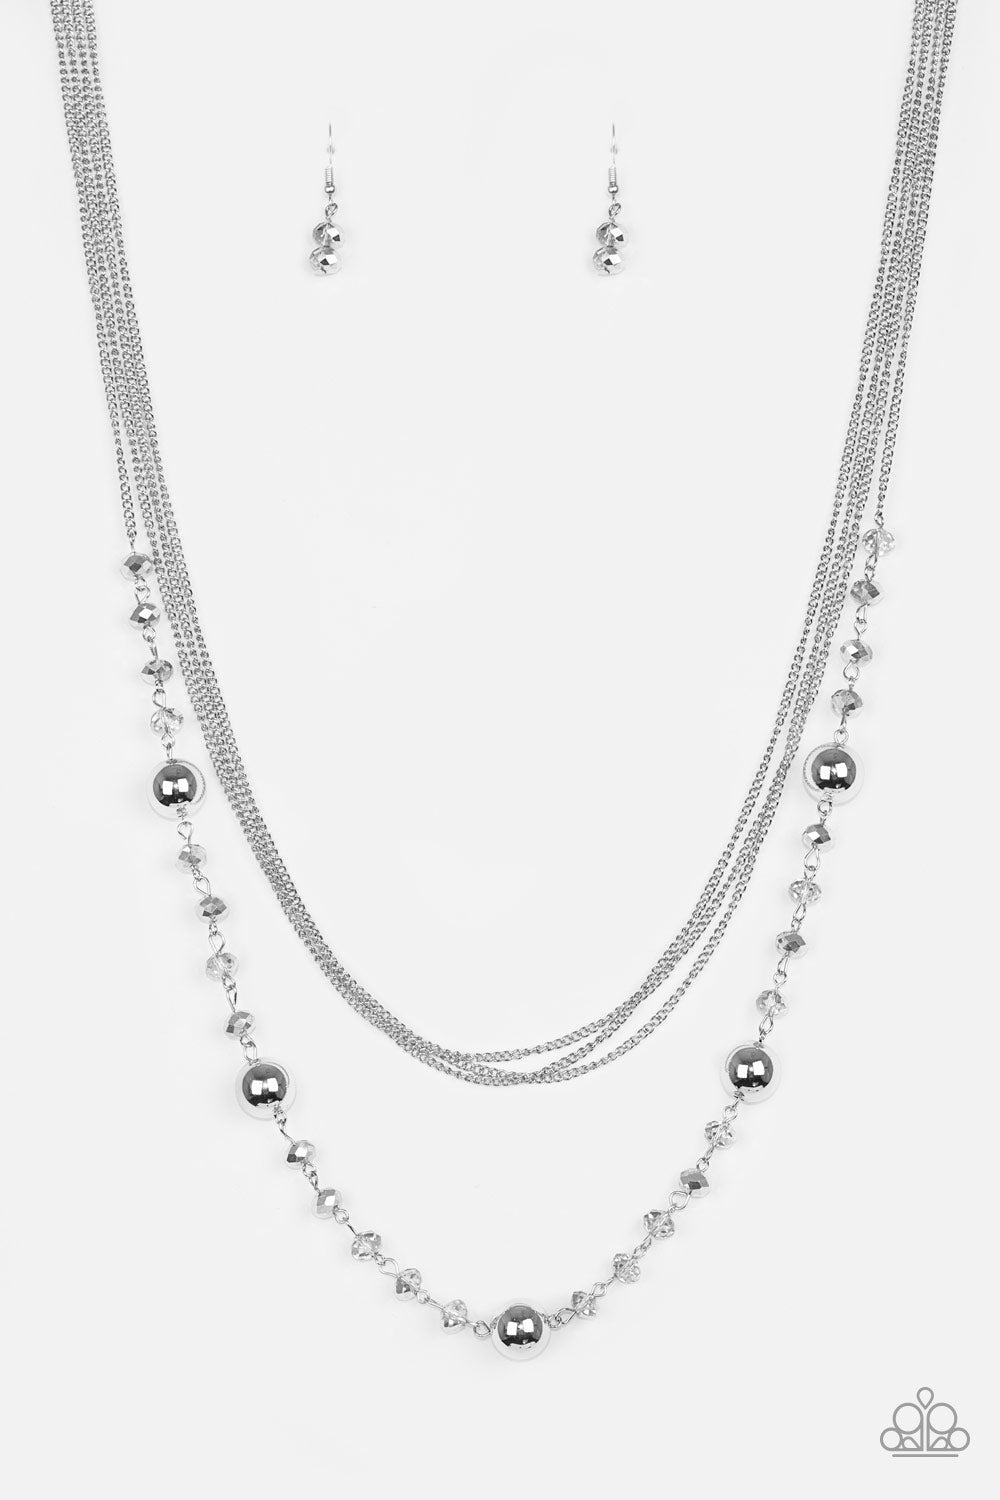 High Standards - Silver Layered Necklace - Paparazzi Accessories - Infused with rows of shimmery silver chains, a strand of glittery metallic crystal-like beads and classic silver accents drape across the chest for a regal finish. Features an adjustable clasp closure. Sold as one individual necklace.